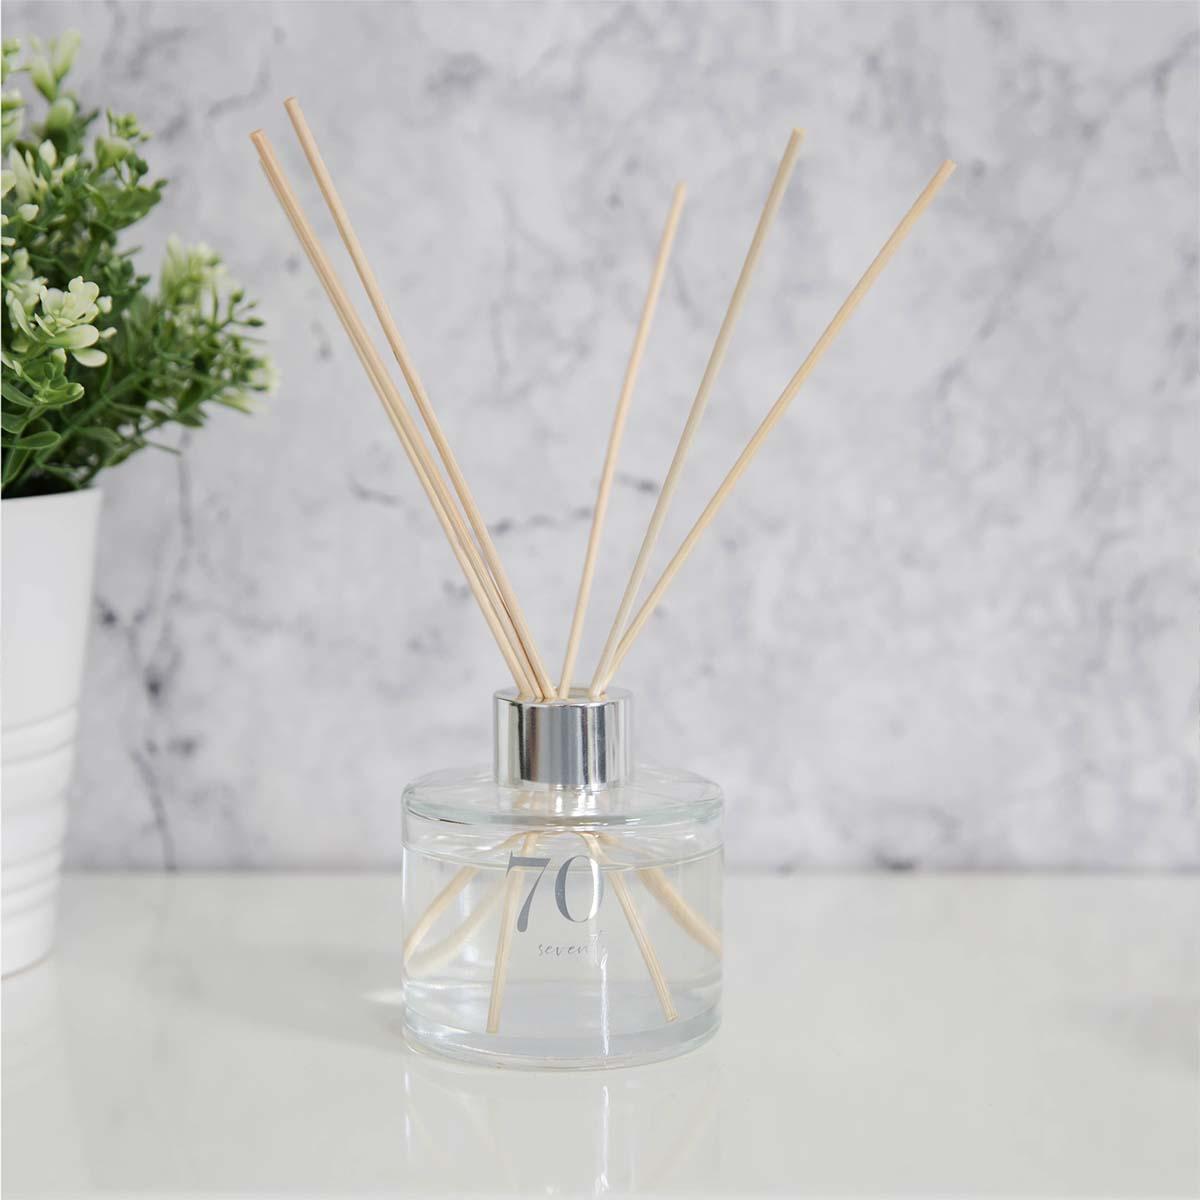 Age 70 Reed Diffuser Displayed In Use